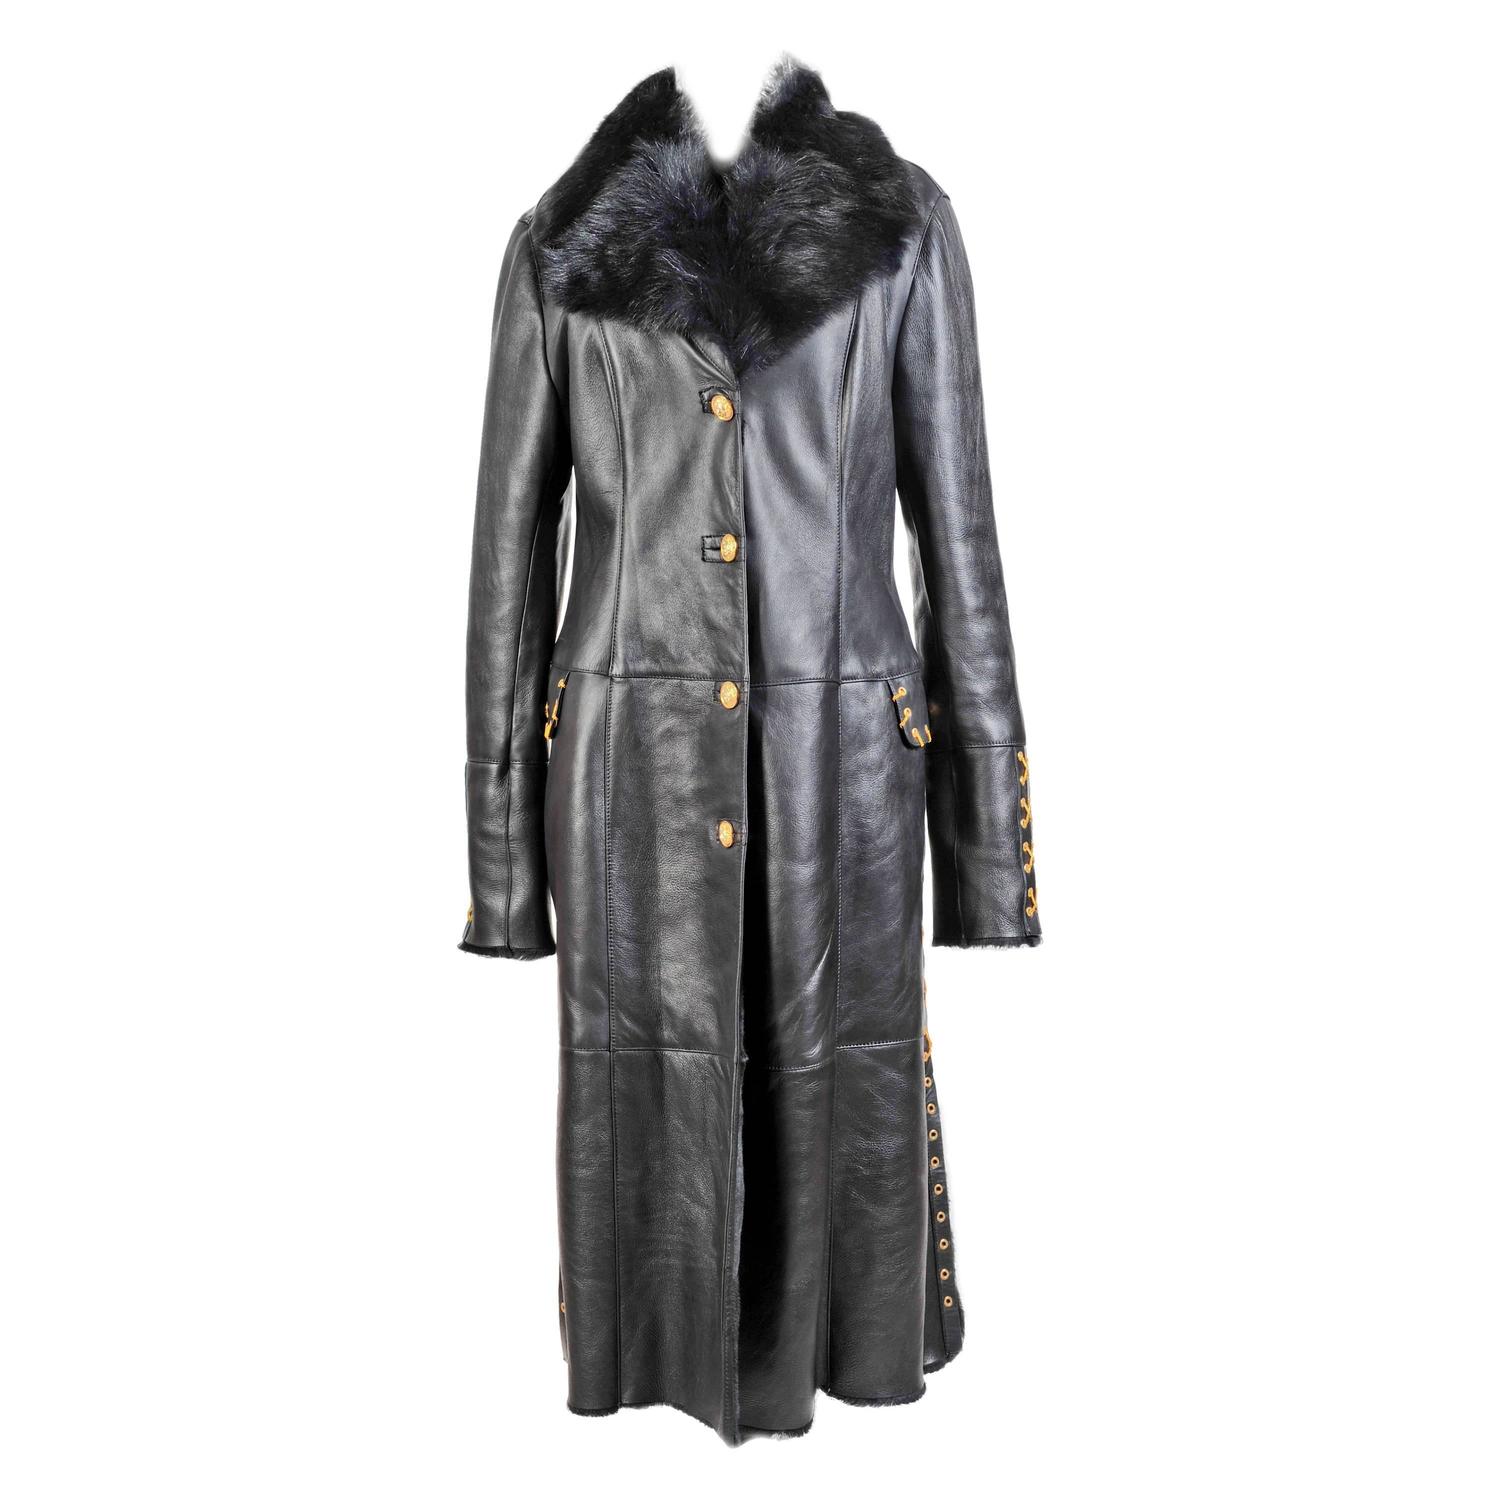 New VERSACE VERSUS BLACK SHEARLING FUR LEATHER COAT For Sale at 1stdibs